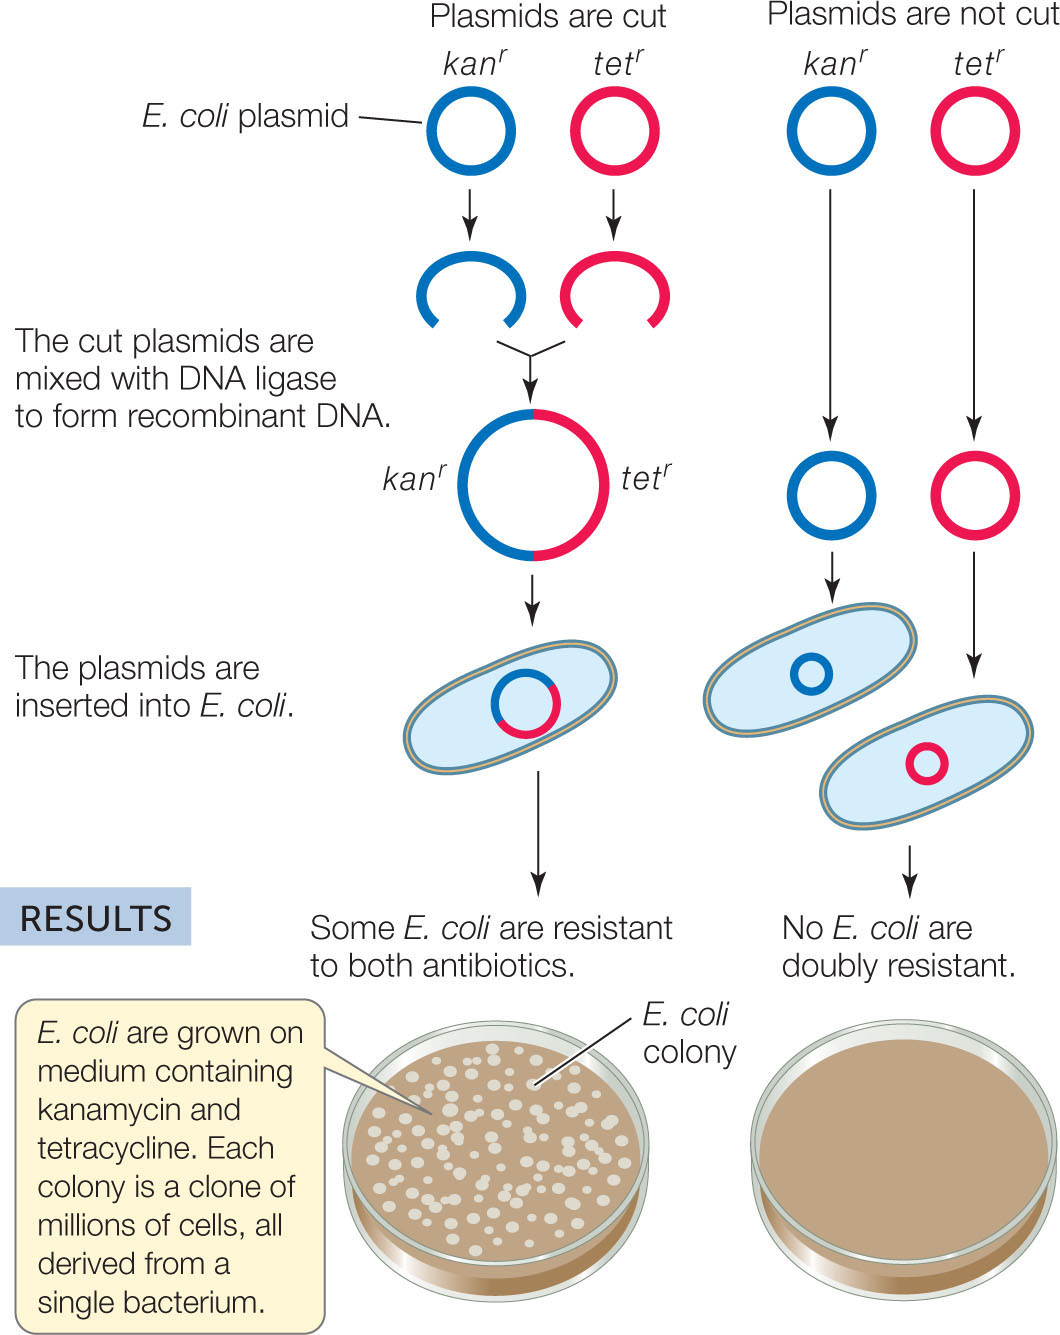 Bacteria carrying a plasmid with an antibiotic resistance gene are important in cloning because